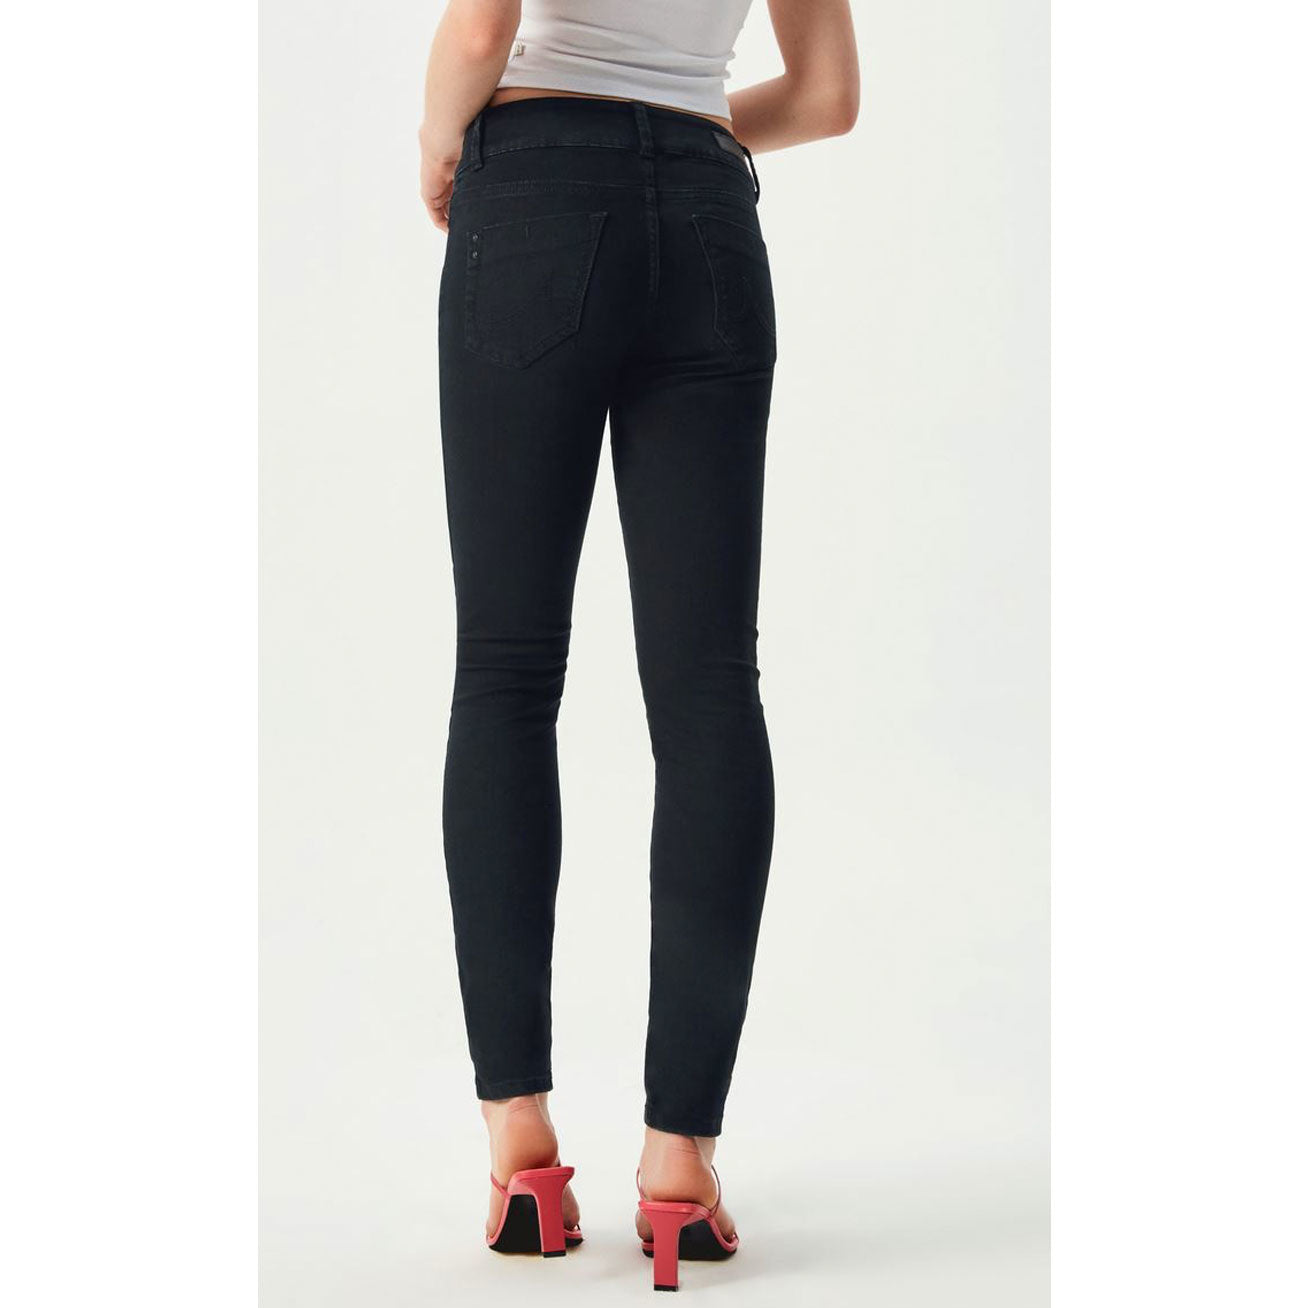 clothing tall women ltb jeans molly m black